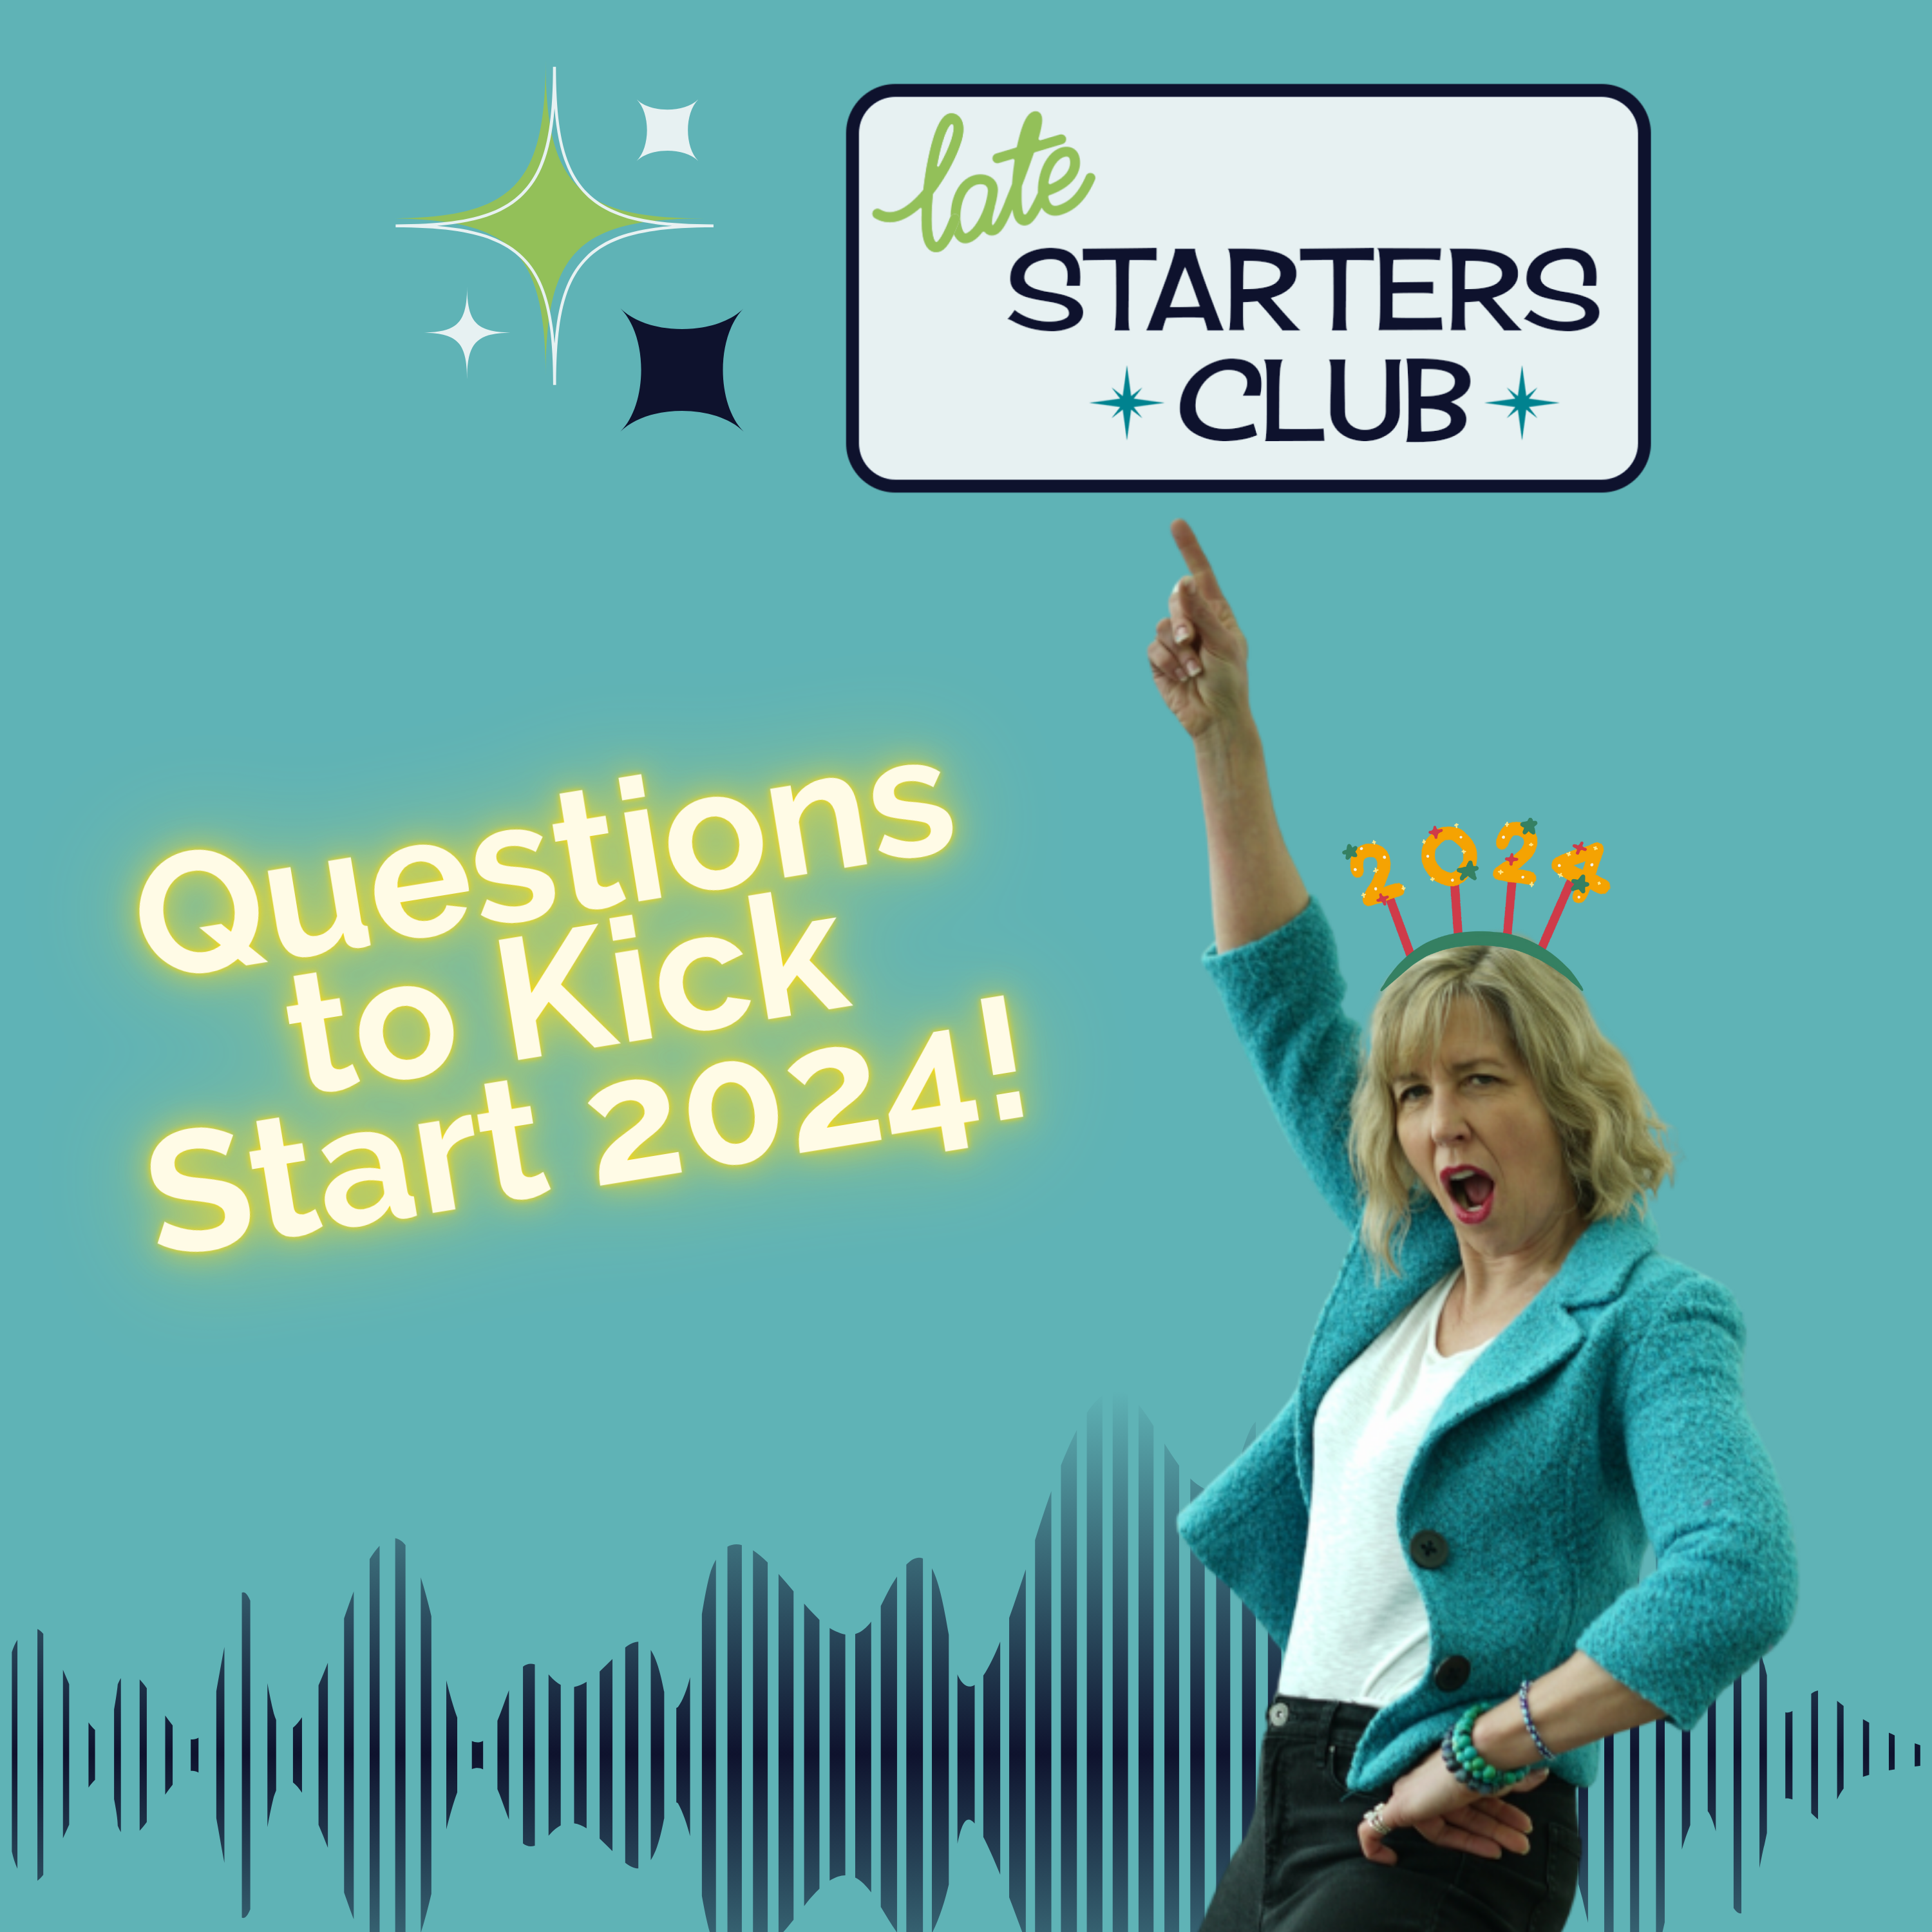 169: Questions to Kick Start 2024